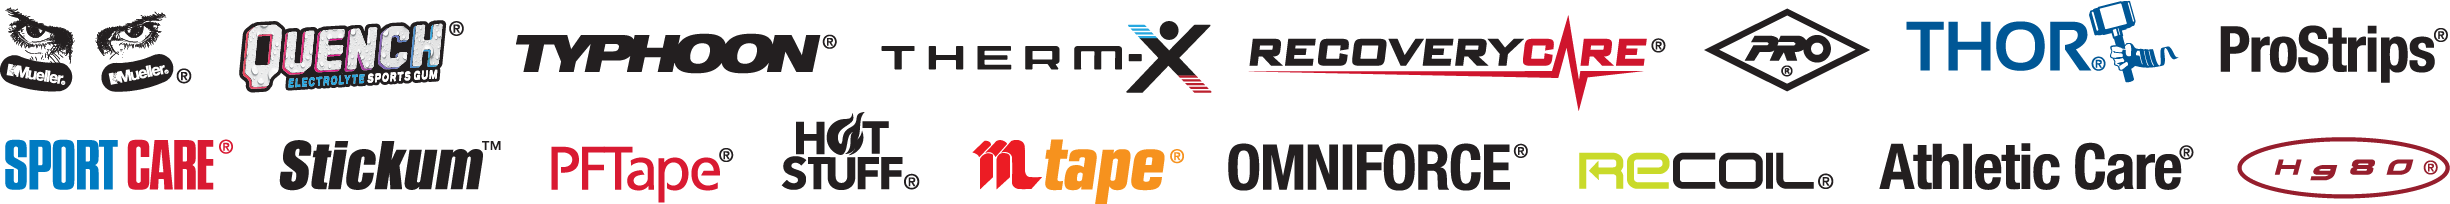 Mueller Sports Medicine Product logos, including Quench, RecoveryCare, and more